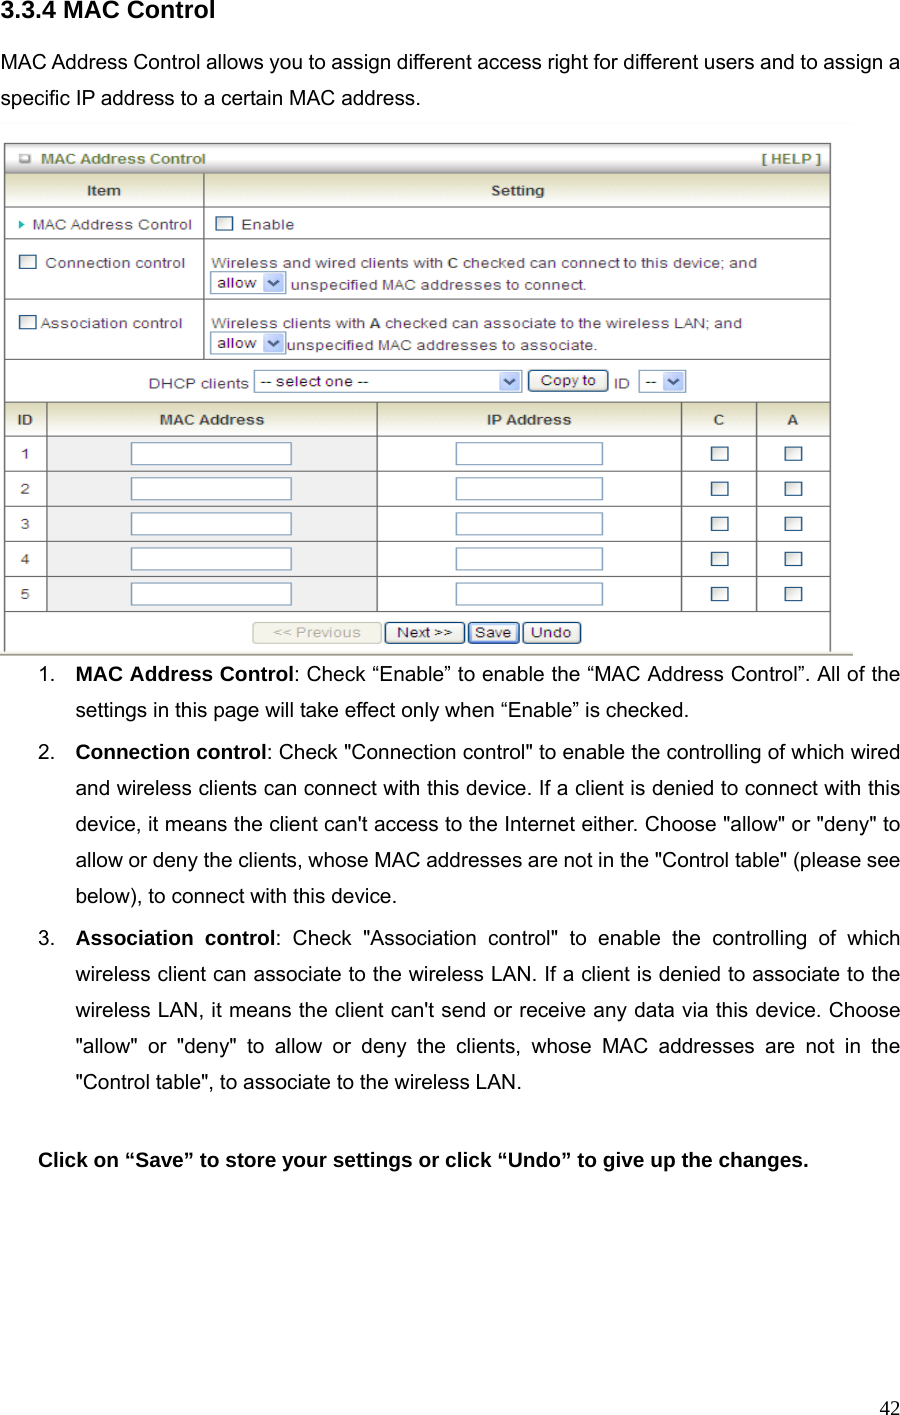  423.3.4 MAC Control  MAC Address Control allows you to assign different access right for different users and to assign a specific IP address to a certain MAC address.  1.  MAC Address Control: Check “Enable” to enable the “MAC Address Control”. All of the settings in this page will take effect only when “Enable” is checked. 2.  Connection control: Check &quot;Connection control&quot; to enable the controlling of which wired and wireless clients can connect with this device. If a client is denied to connect with this device, it means the client can&apos;t access to the Internet either. Choose &quot;allow&quot; or &quot;deny&quot; to allow or deny the clients, whose MAC addresses are not in the &quot;Control table&quot; (please see below), to connect with this device. 3.  Association control: Check &quot;Association control&quot; to enable the controlling of which wireless client can associate to the wireless LAN. If a client is denied to associate to the wireless LAN, it means the client can&apos;t send or receive any data via this device. Choose &quot;allow&quot; or &quot;deny&quot; to allow or deny the clients, whose MAC addresses are not in the &quot;Control table&quot;, to associate to the wireless LAN.  Click on “Save” to store your settings or click “Undo” to give up the changes.     